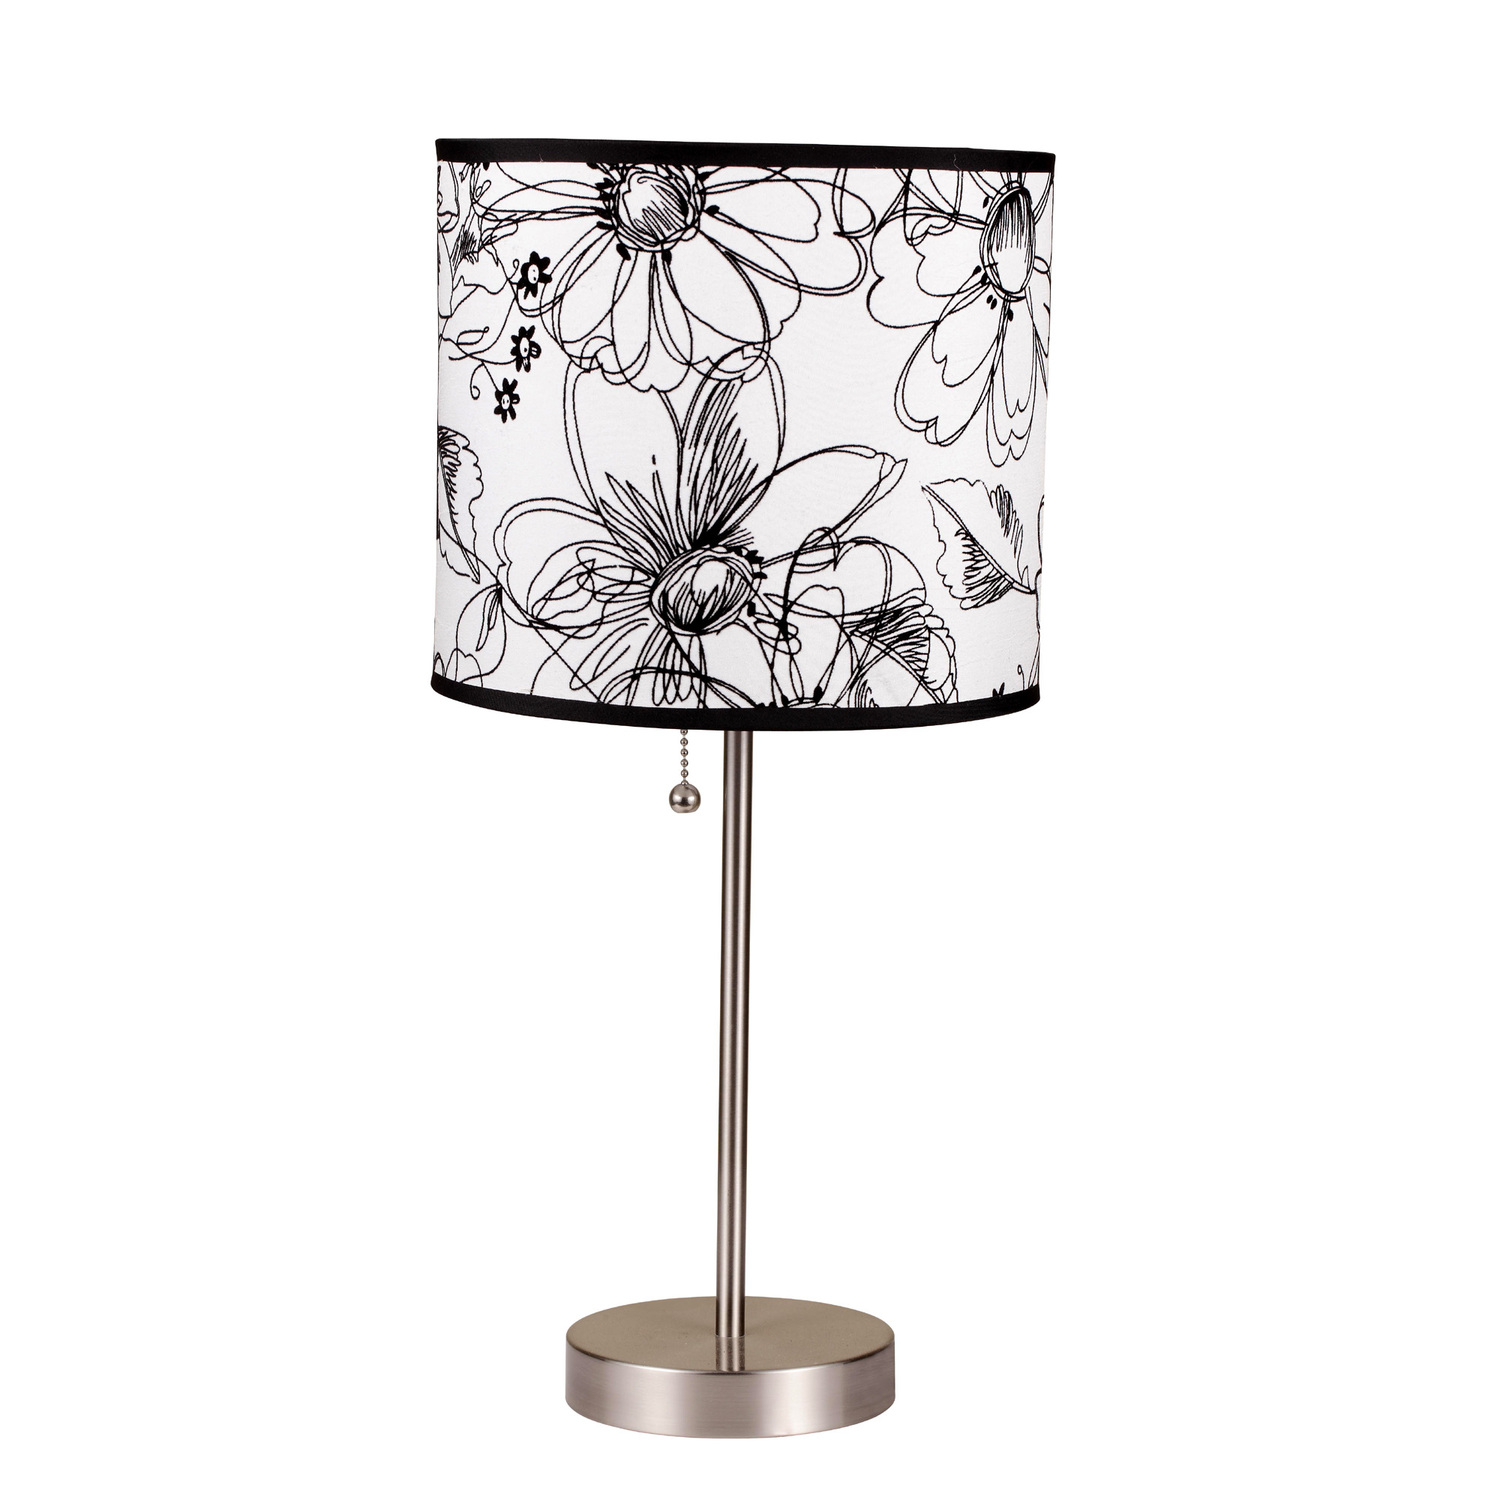 ORE International Floral Print 2-Piece Table Lamp - image 1 of 2